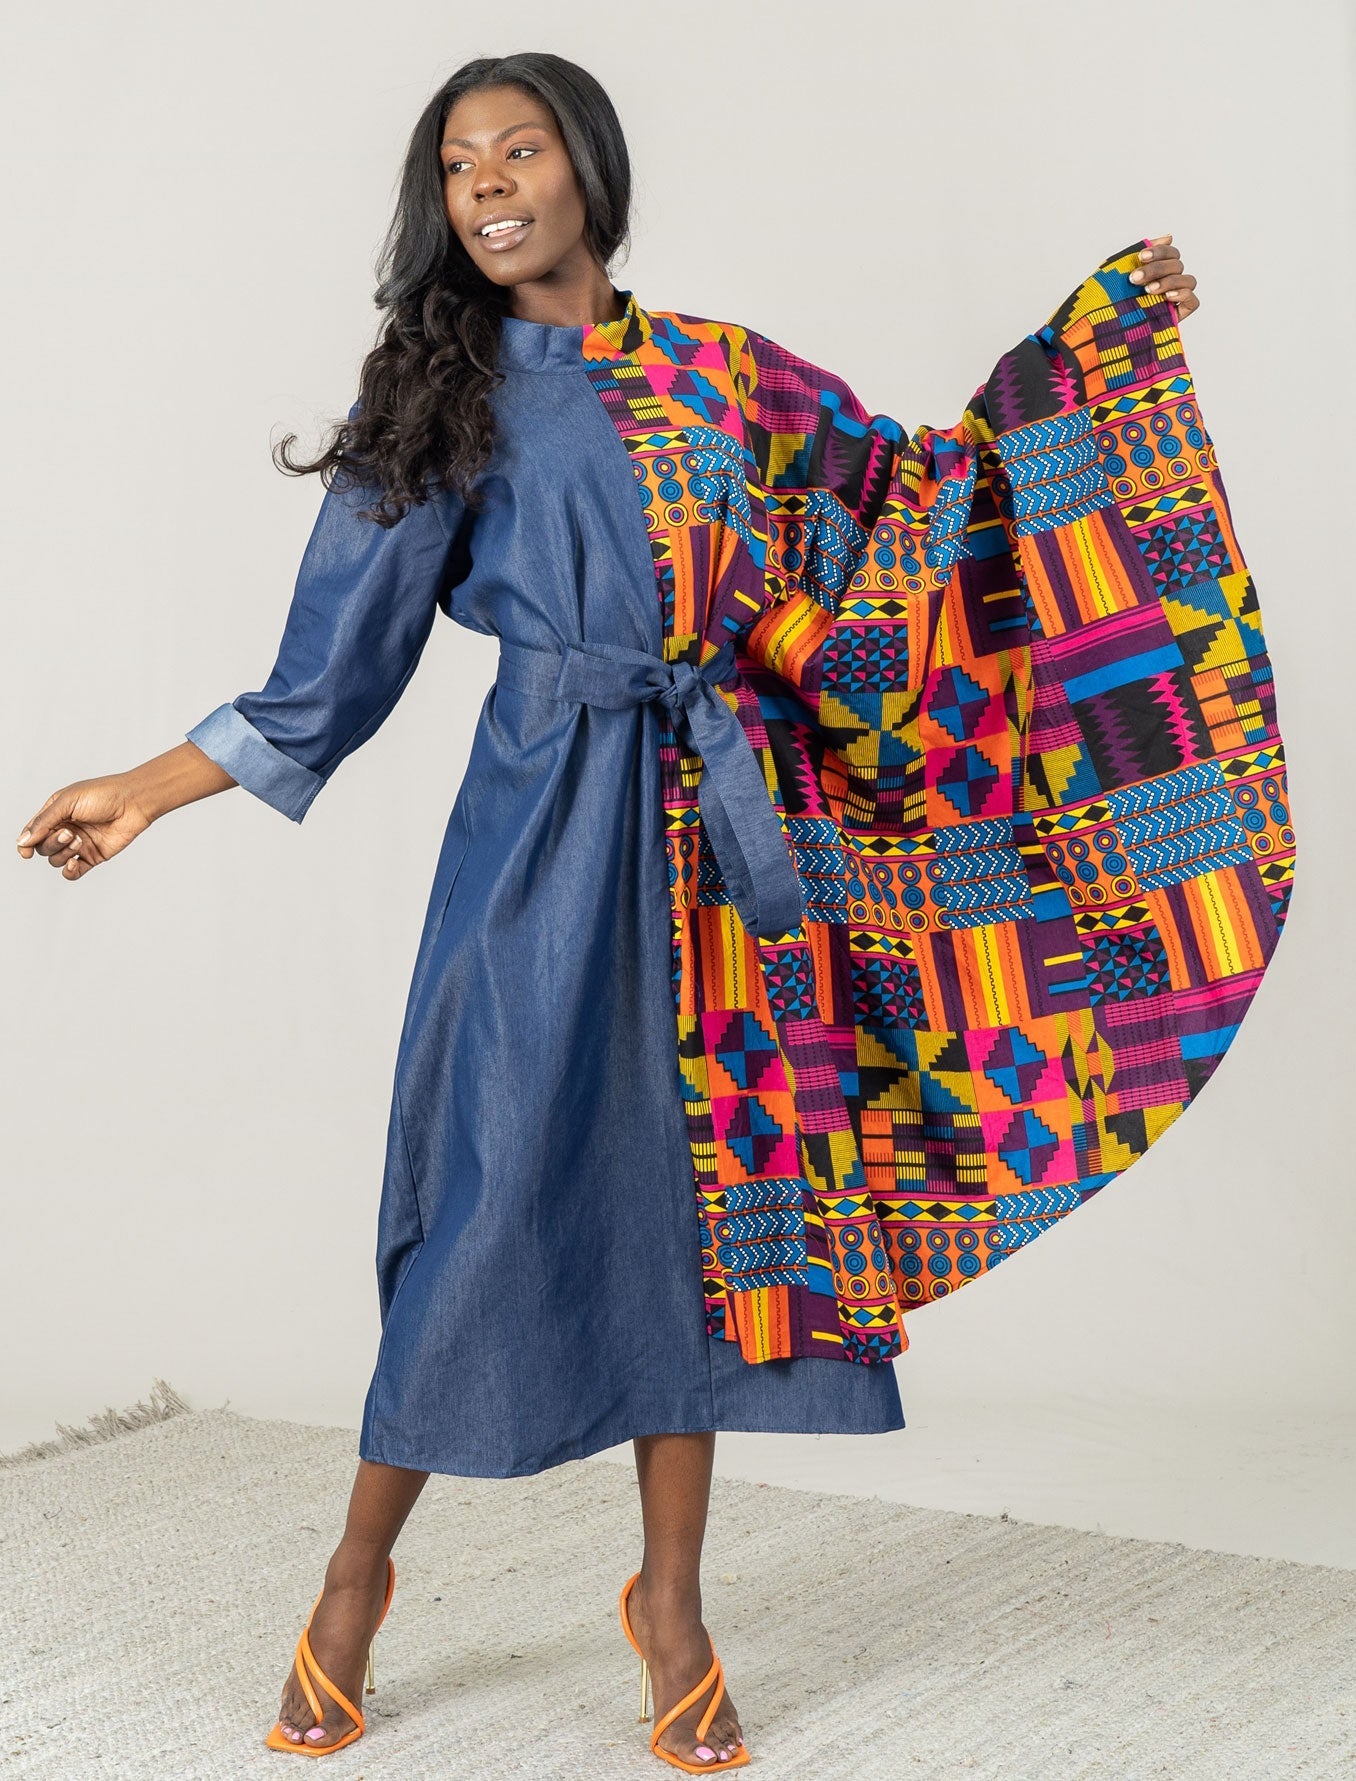 African Prints Wear | Church suits for less